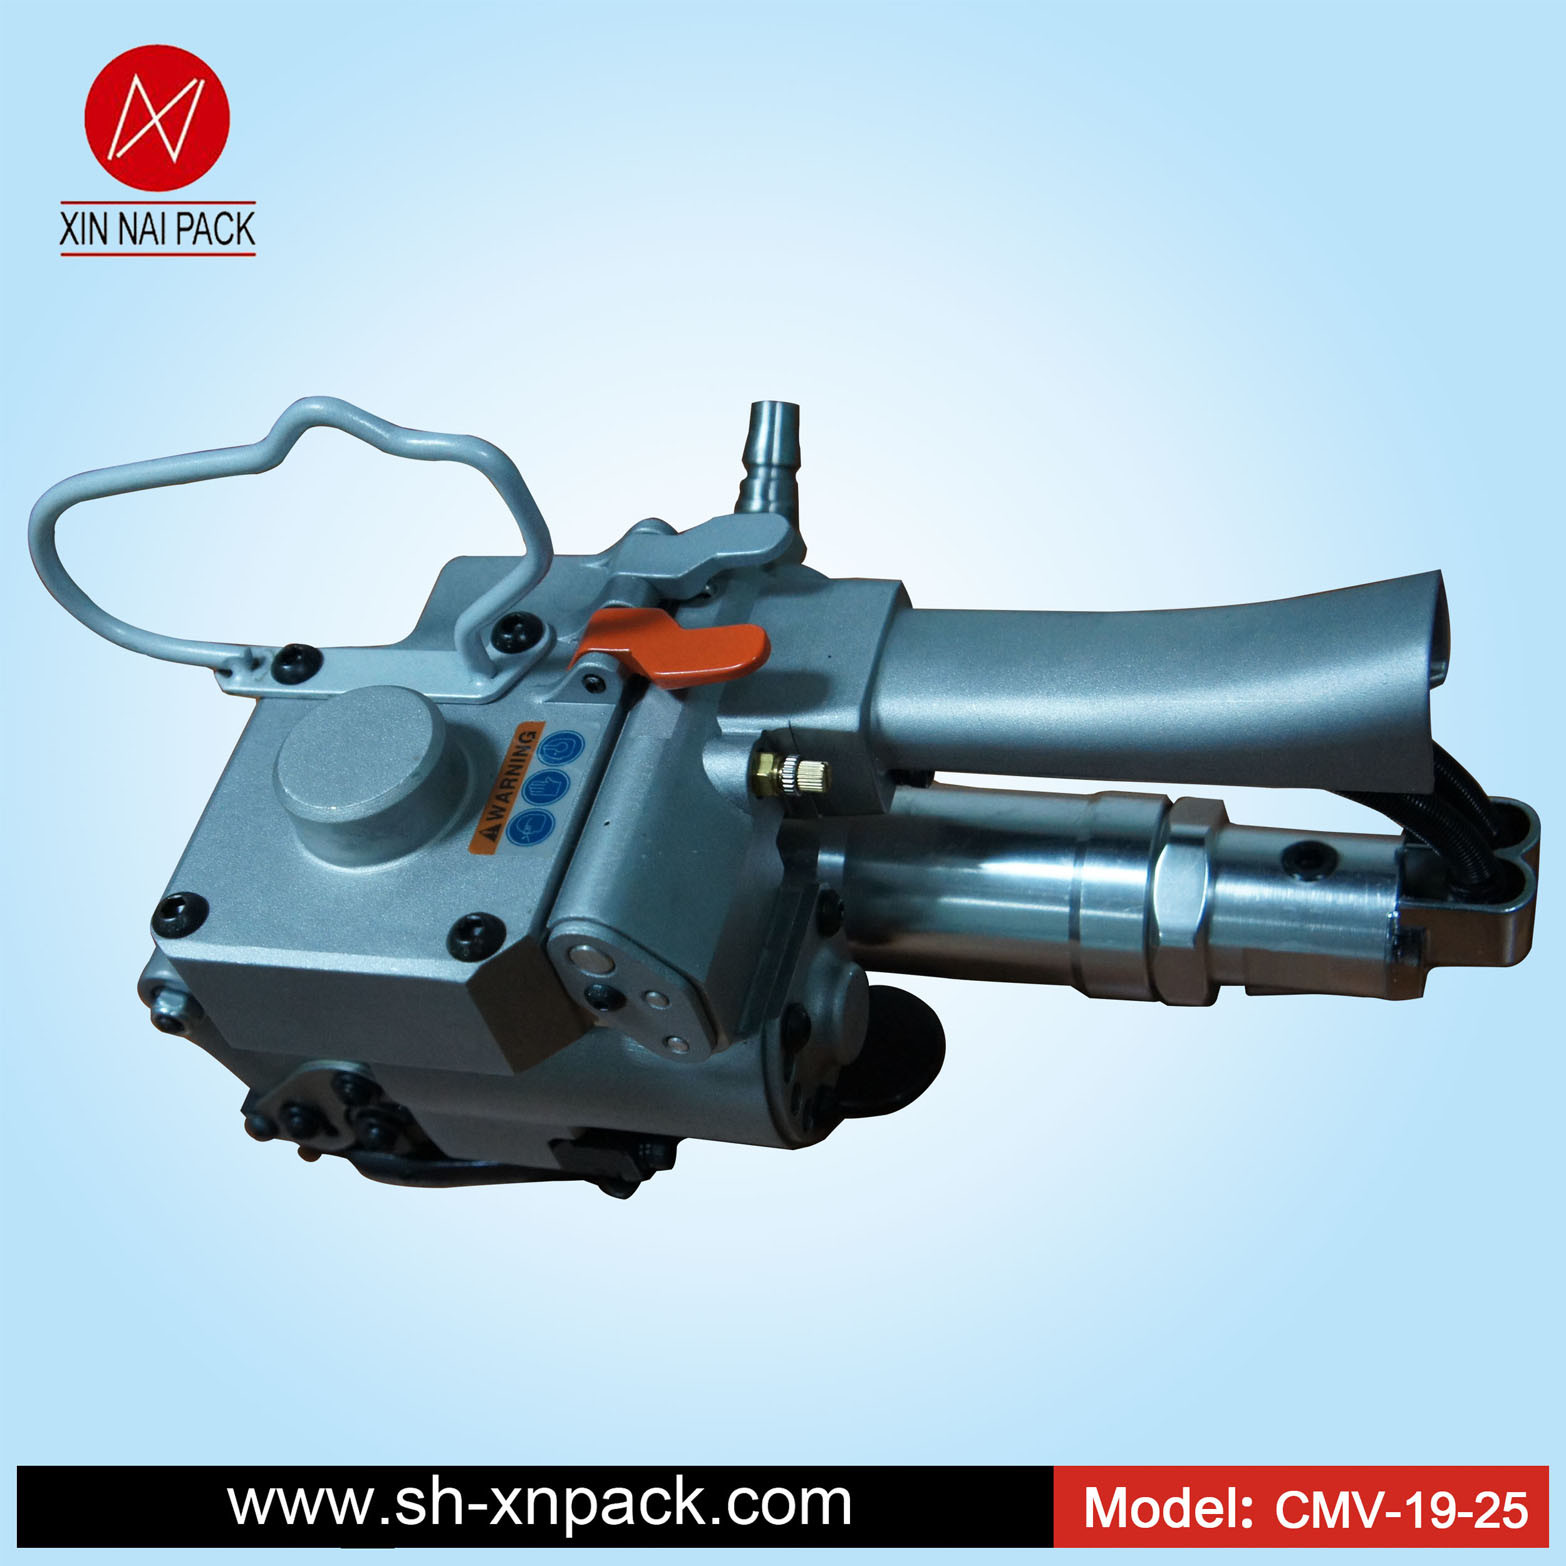 Automatic Pneumatic Plastic Strapping Tools (CMV-25)